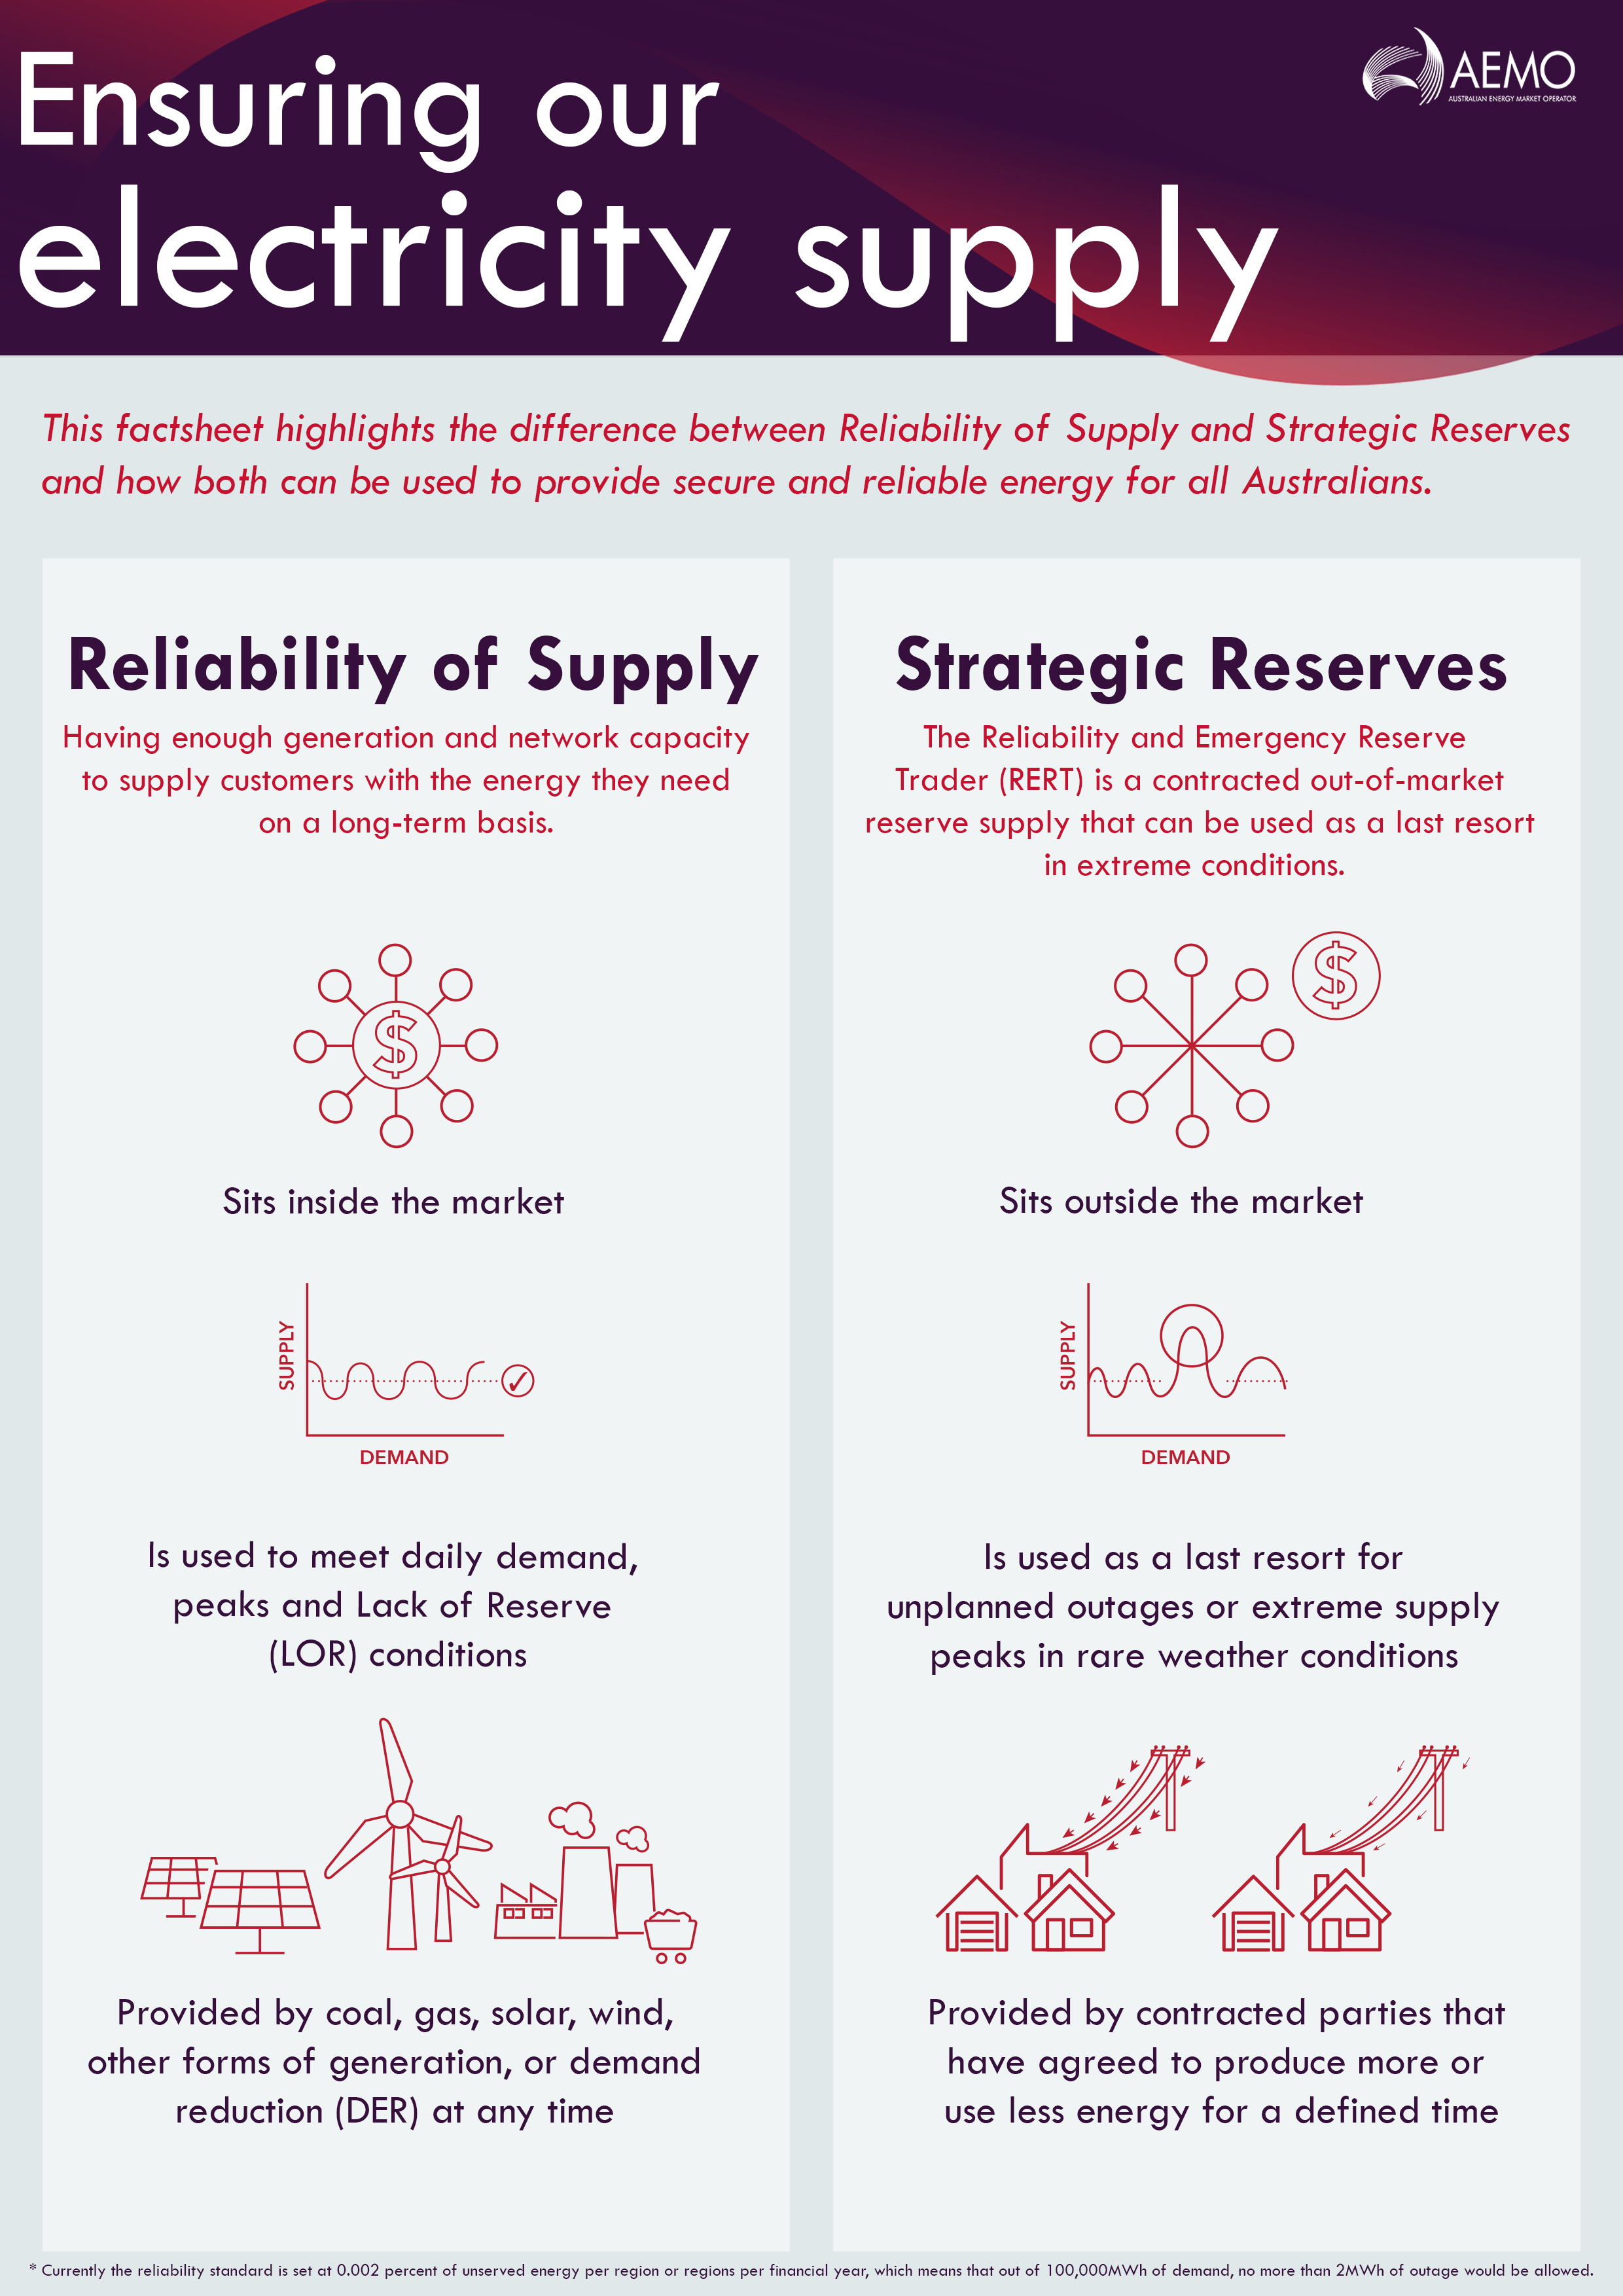 Infographic depicting Reliability of Supply and Strategic Reserves